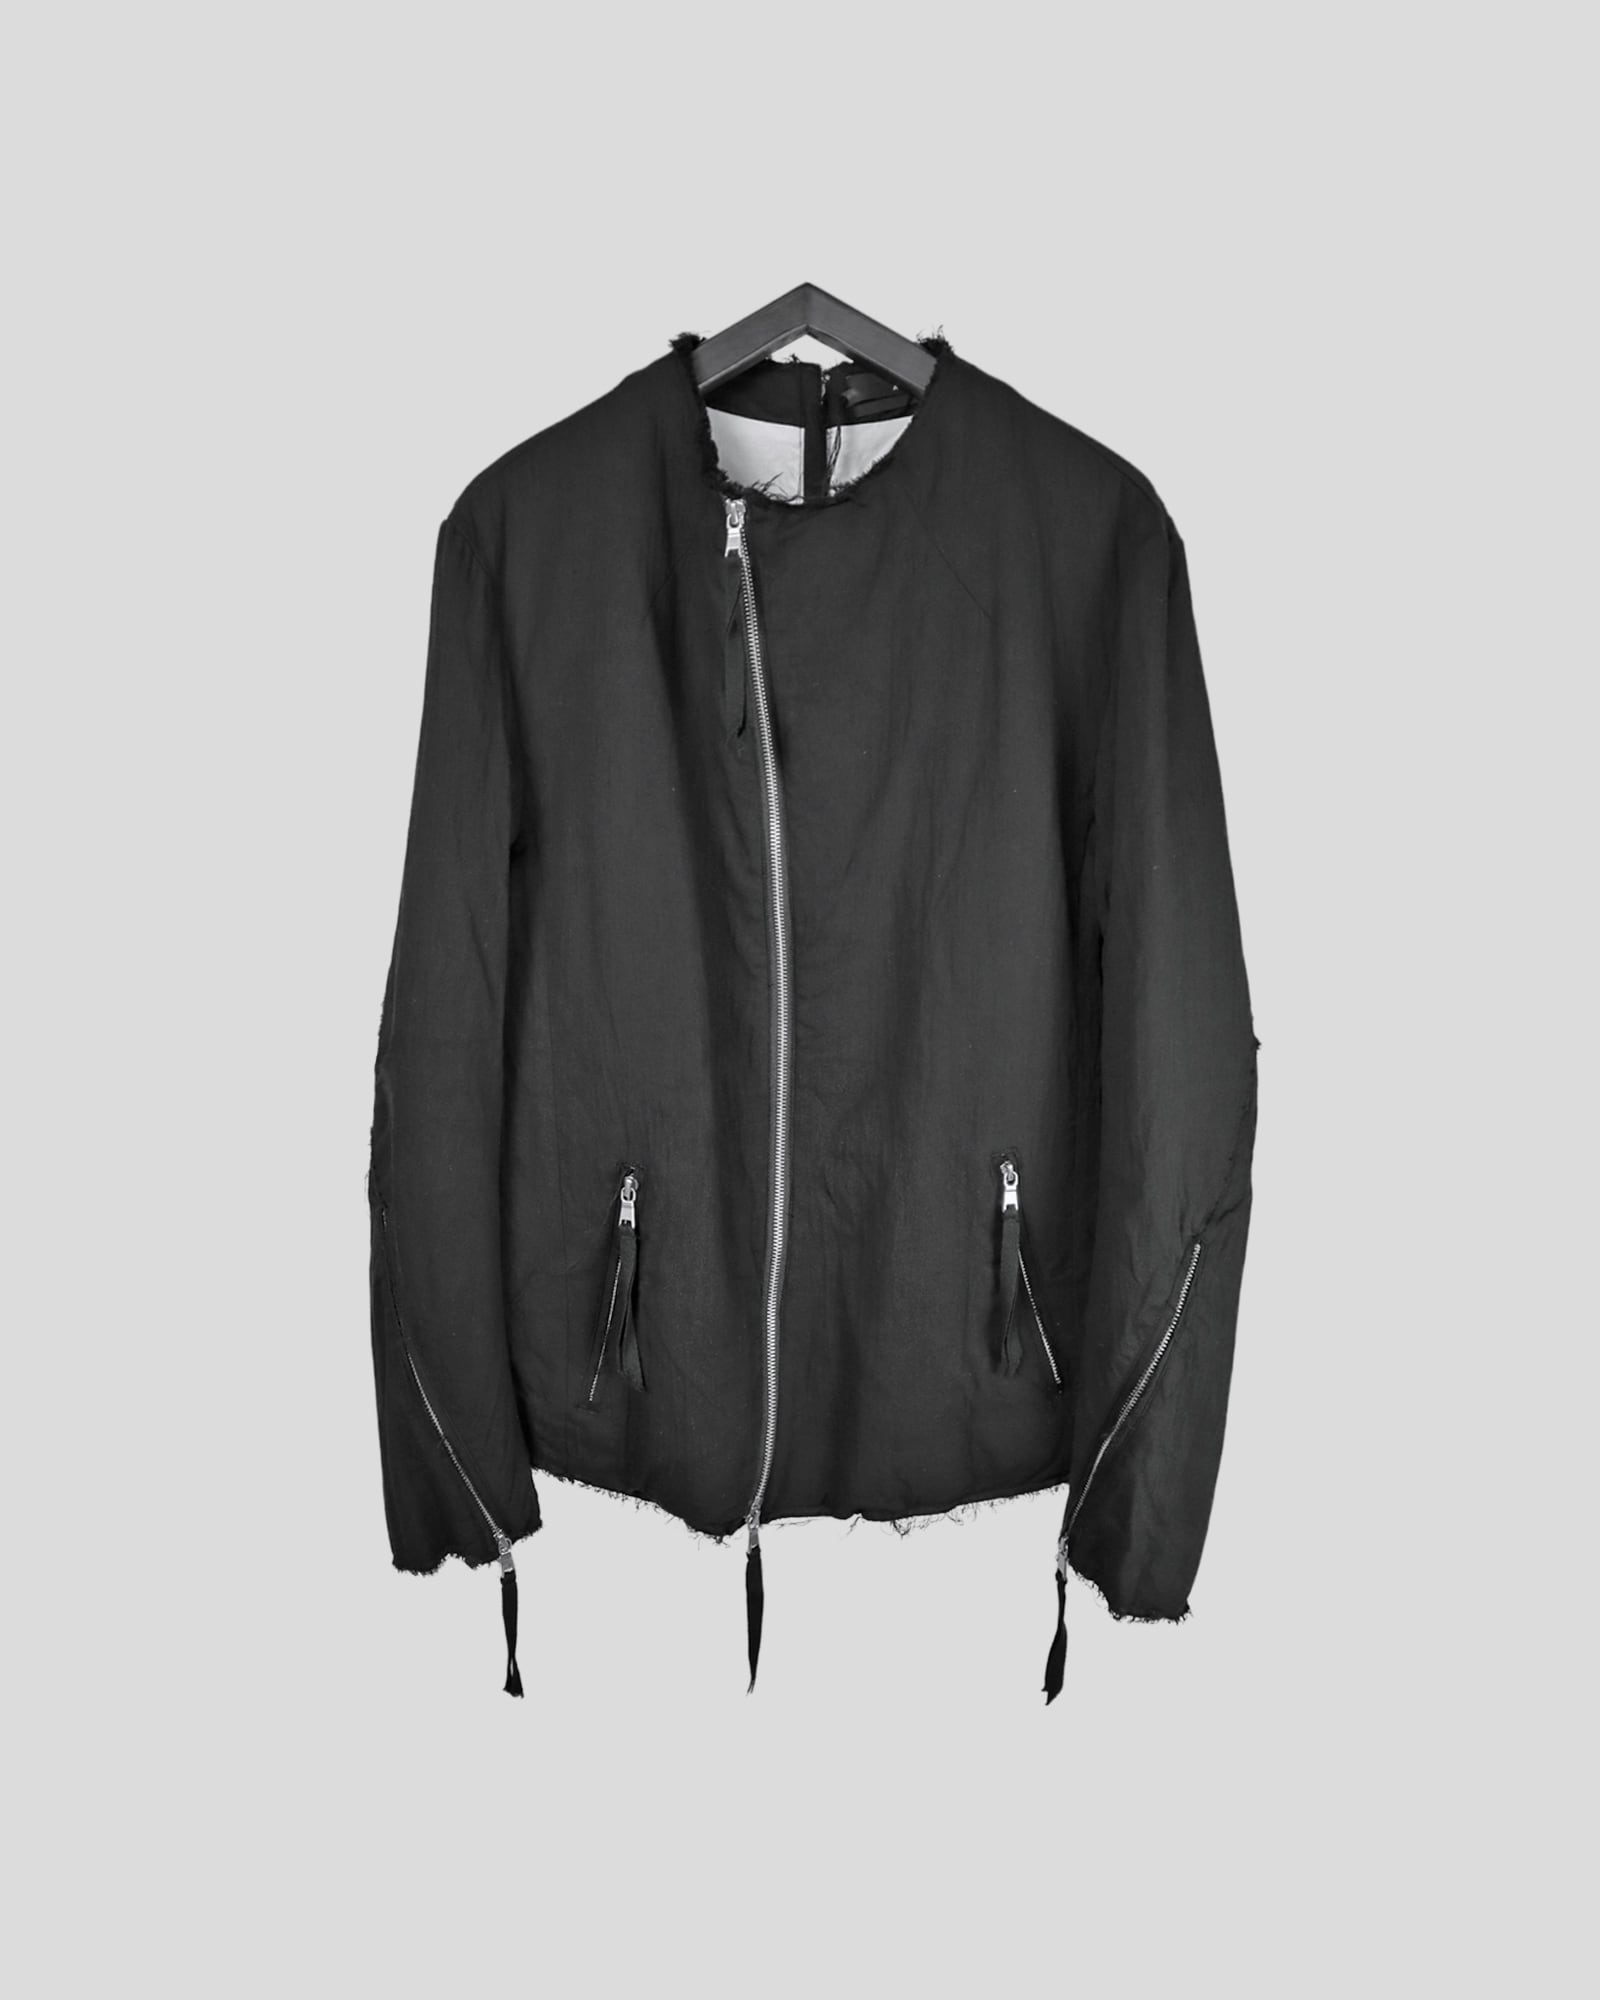 ASKYY / CURVED ZIPPER RIDERS JACKET